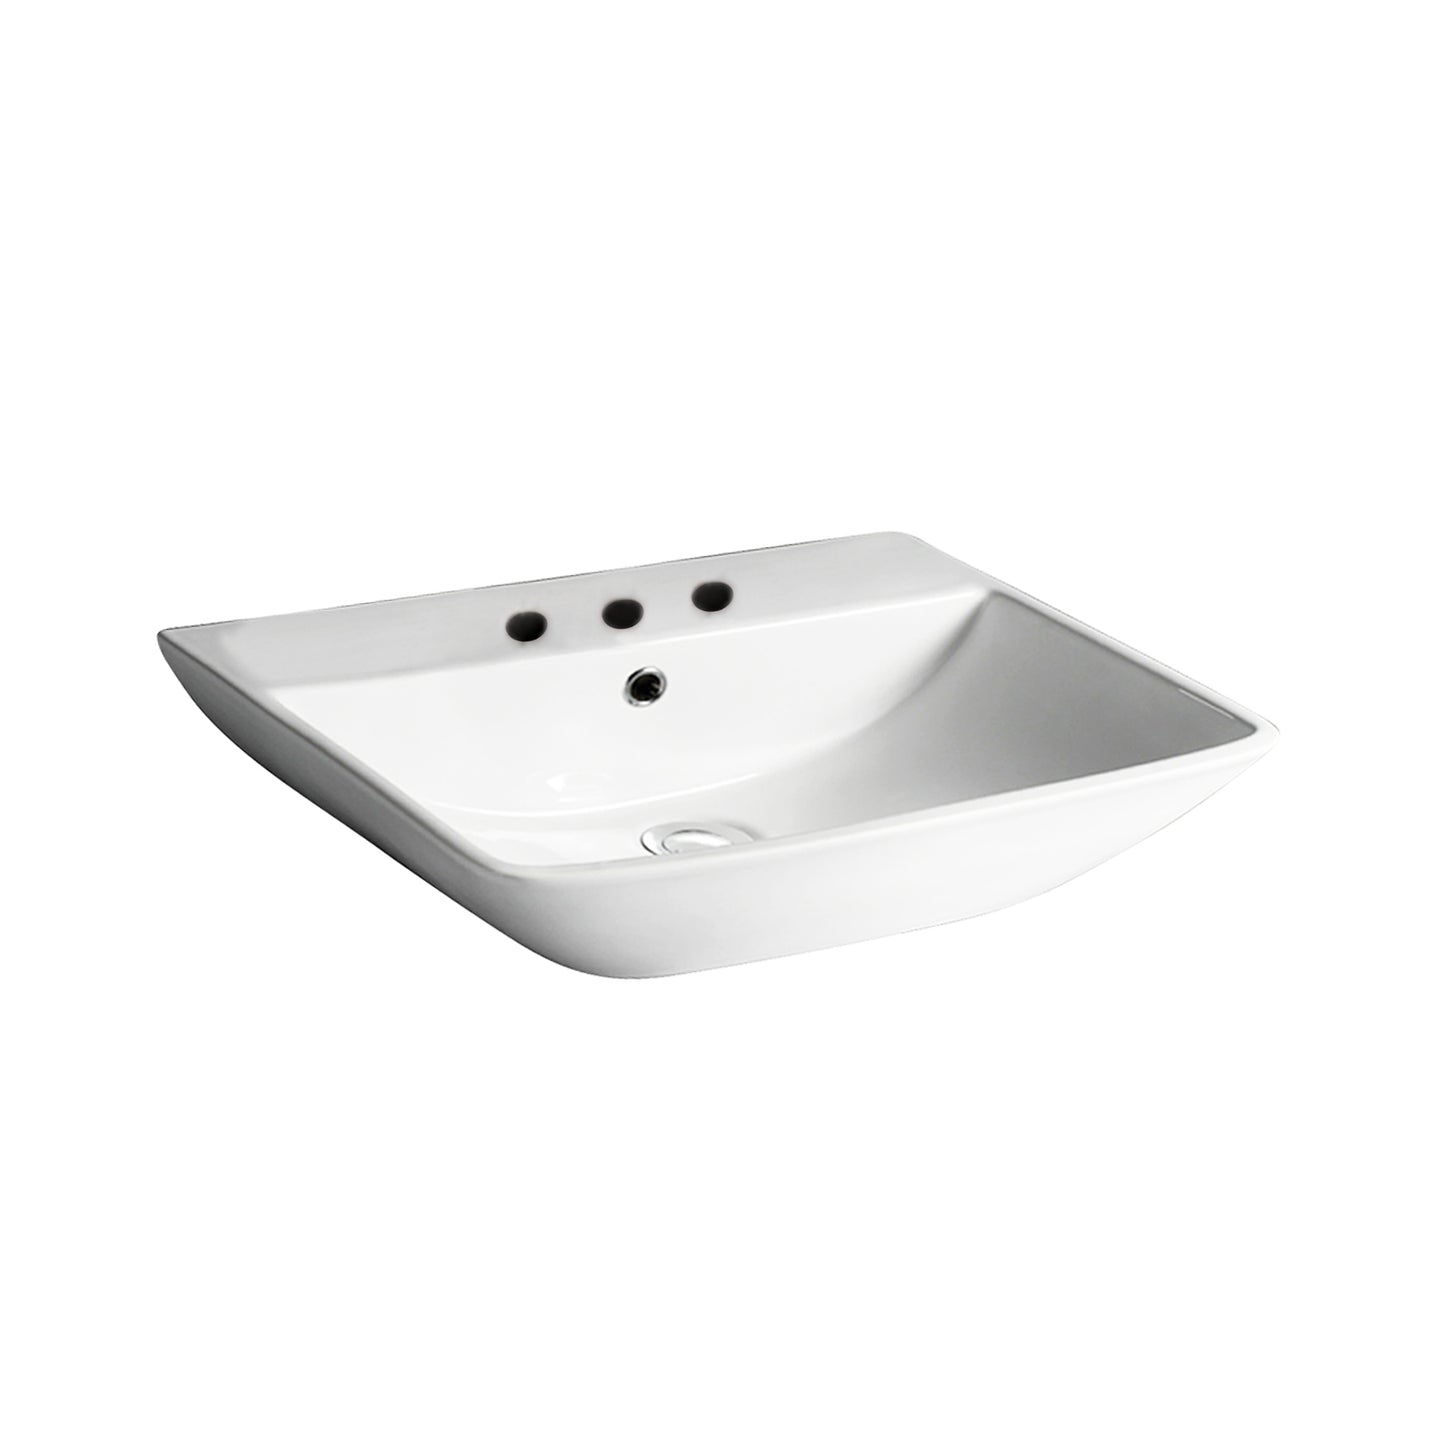 Summit 600 Wall Hung Bathroom Sink White for 8" Widespread